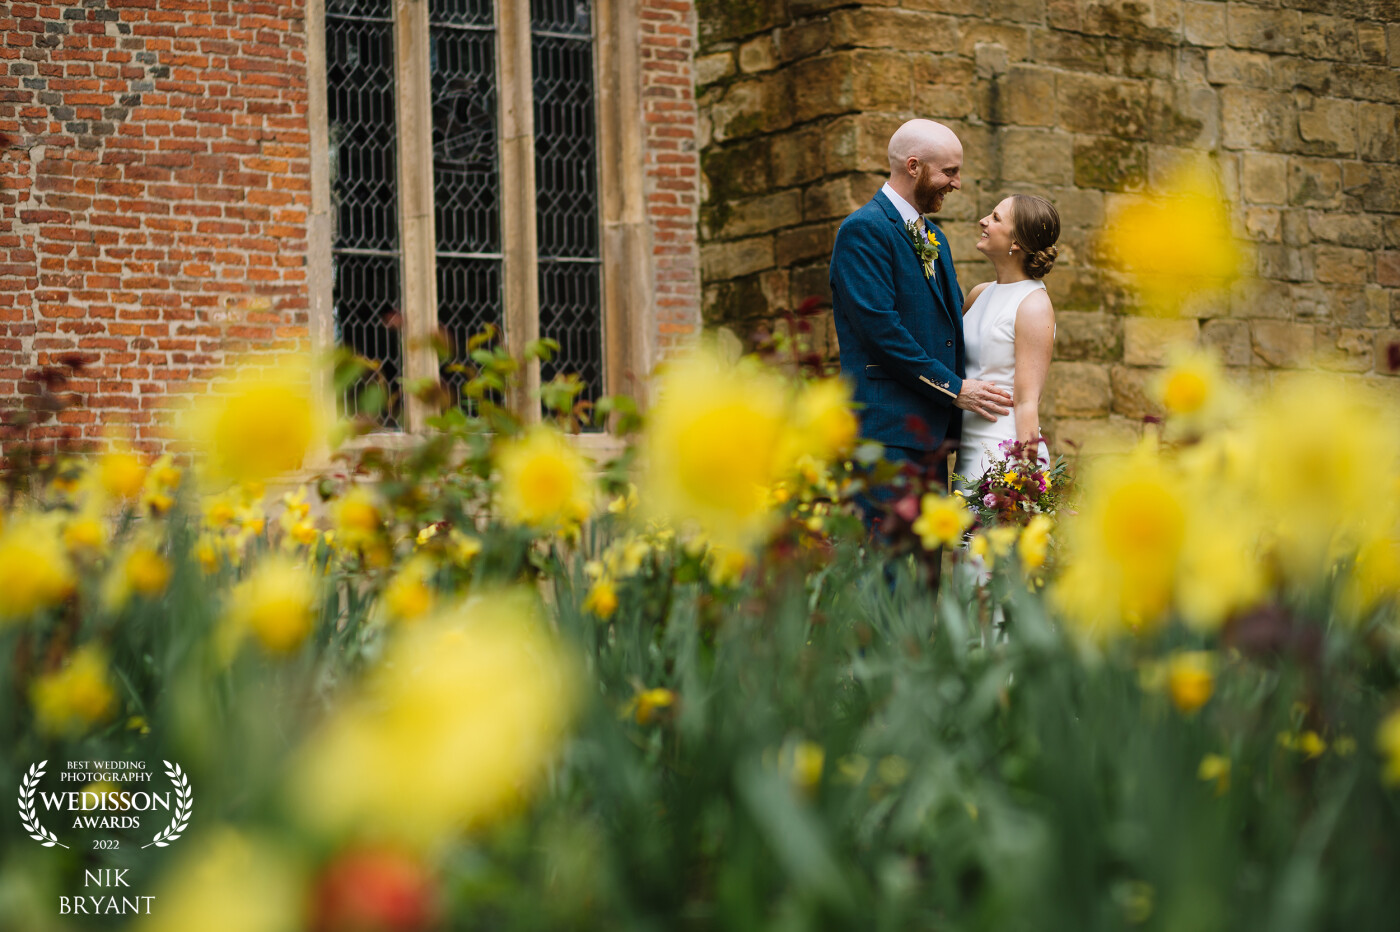 A spring wedding amongst the daffodils for Hannah and Tom at one of the most beautiful yet haunted venues in britain, Samlesbury Hall